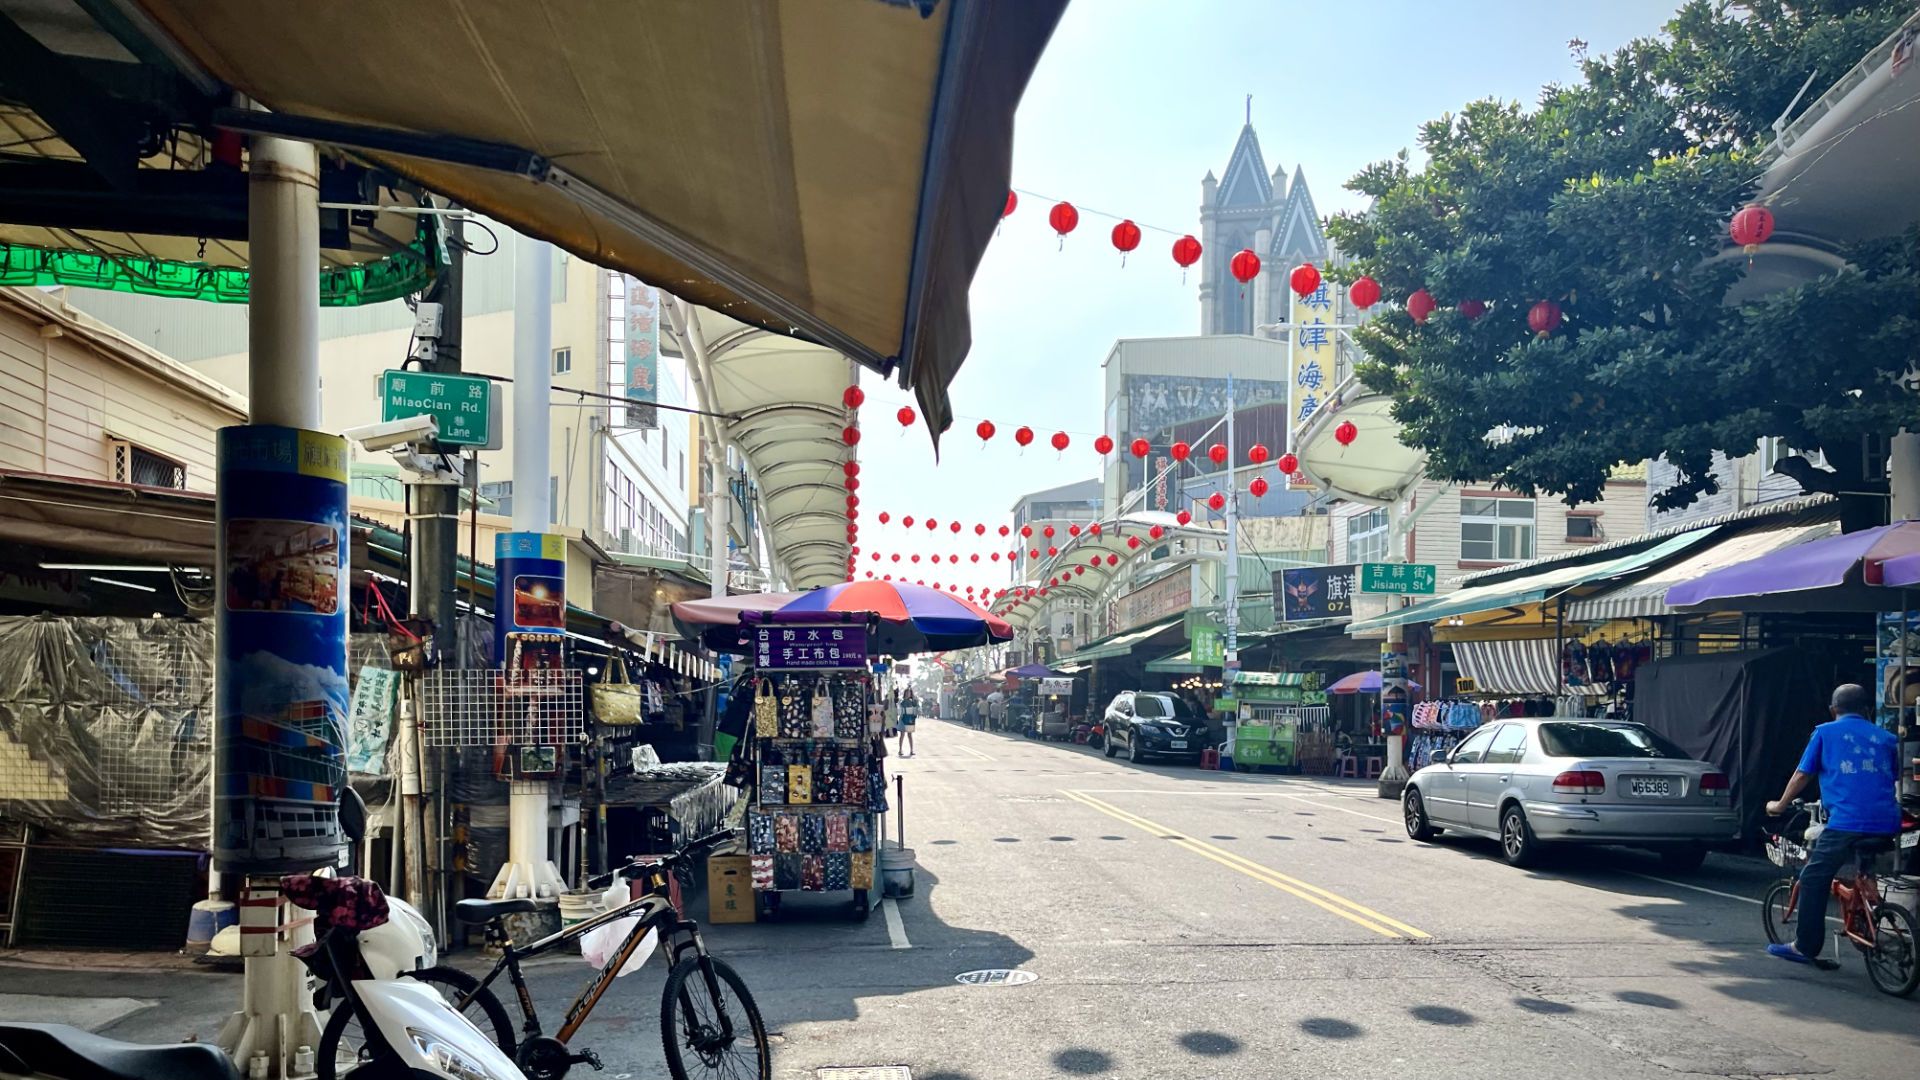 The main street on Cijin Island, with red lanterns hanging above the road and stalls and shops on either side.